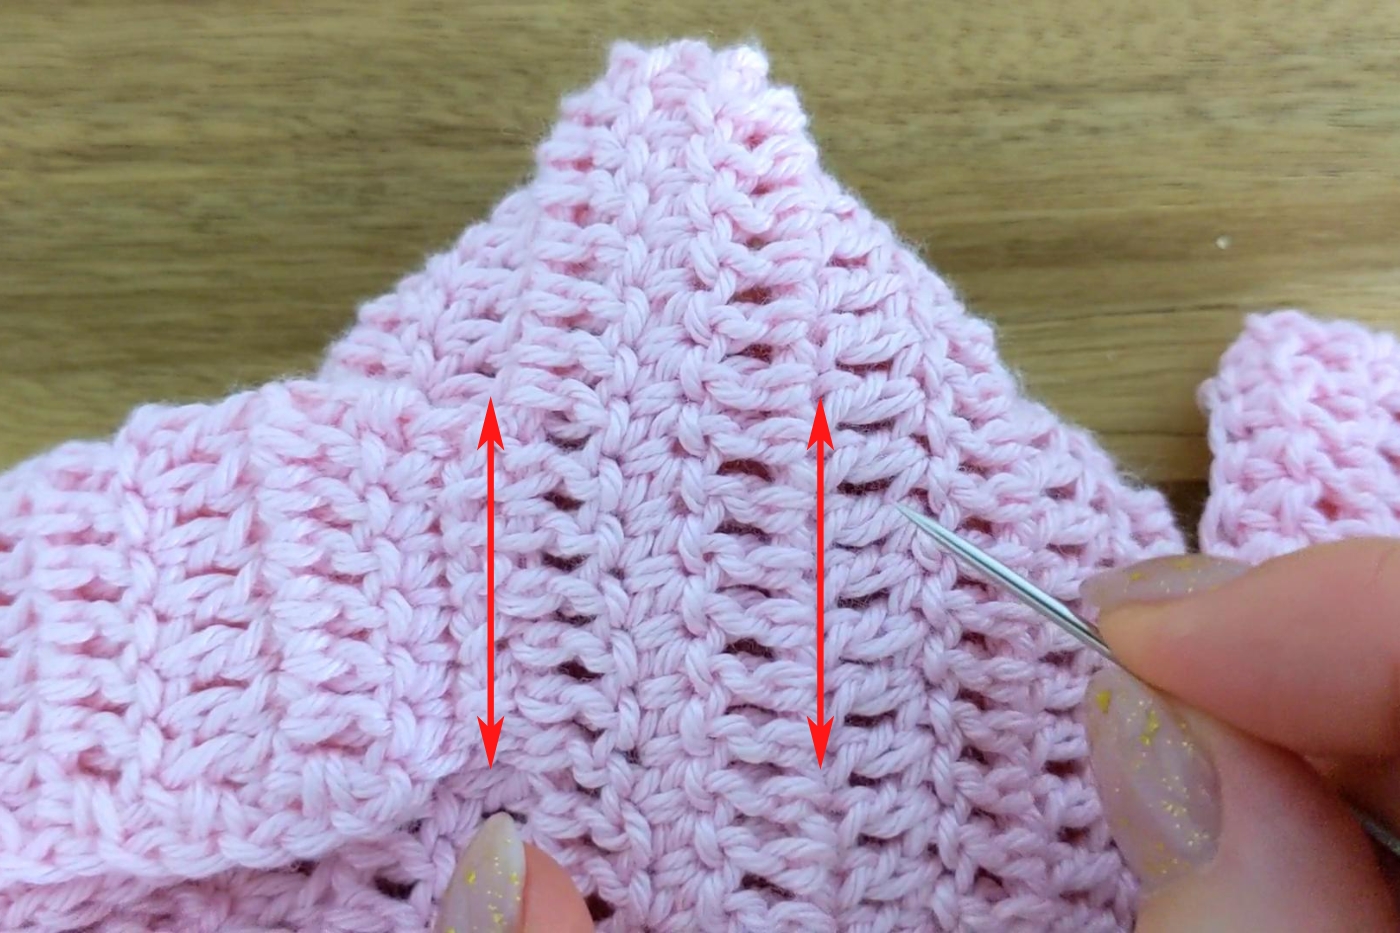 sewing on bunny ears